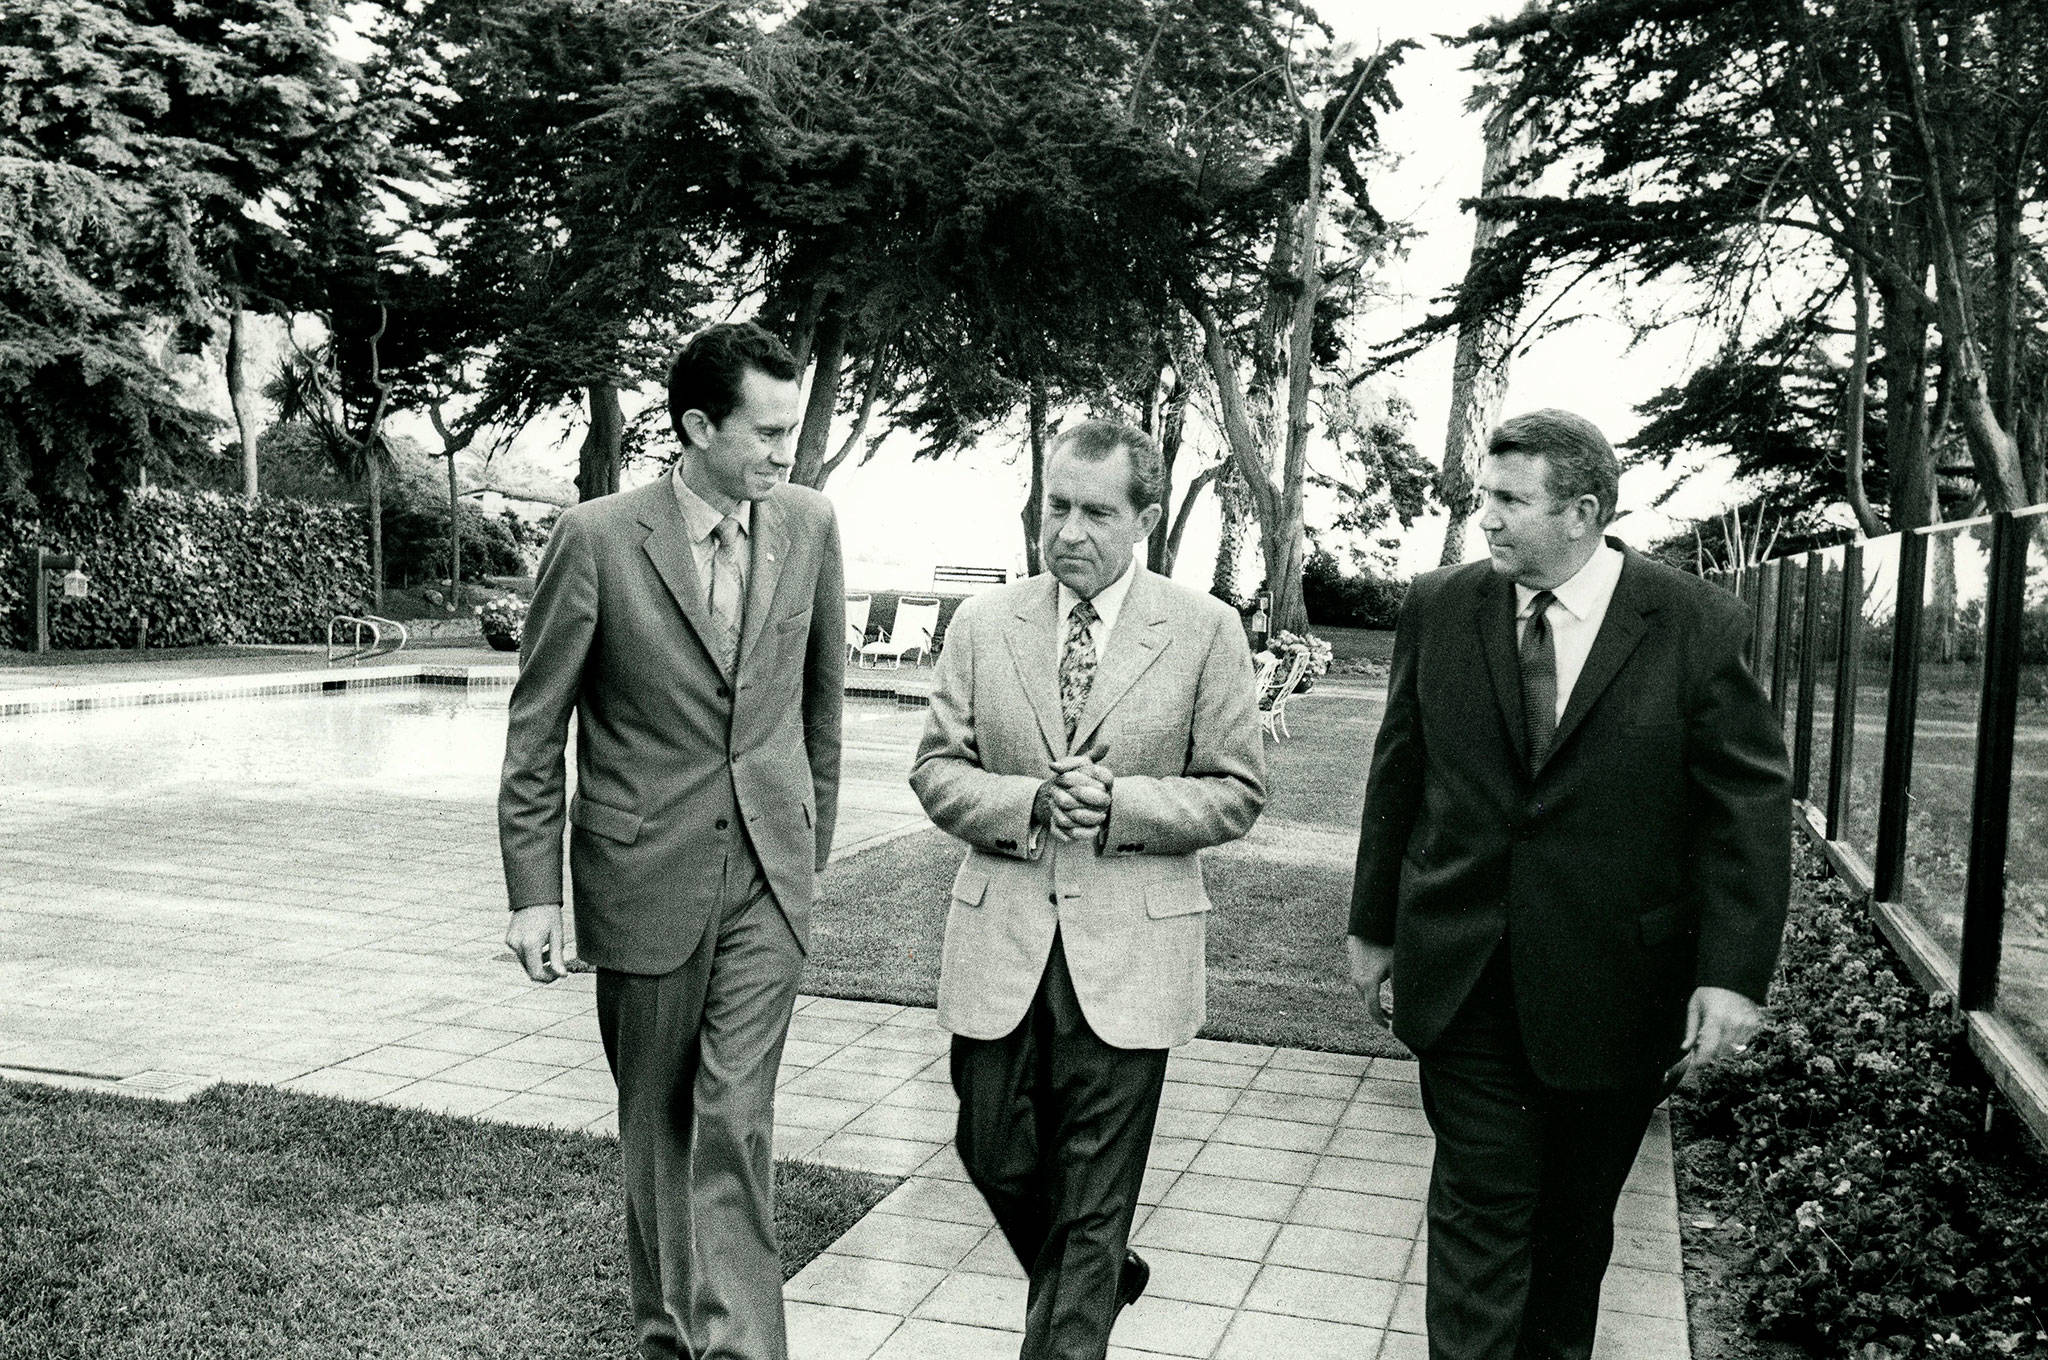 Ed Nixon (left) with his brothers, President Richard Nixon (center) and Donald Nixon, in San Clemente, California, in 1970. A longtime Lynnwood resident, Ed Nixon died Wednesday at age 88. (Richard Nixon Foundation Photo)